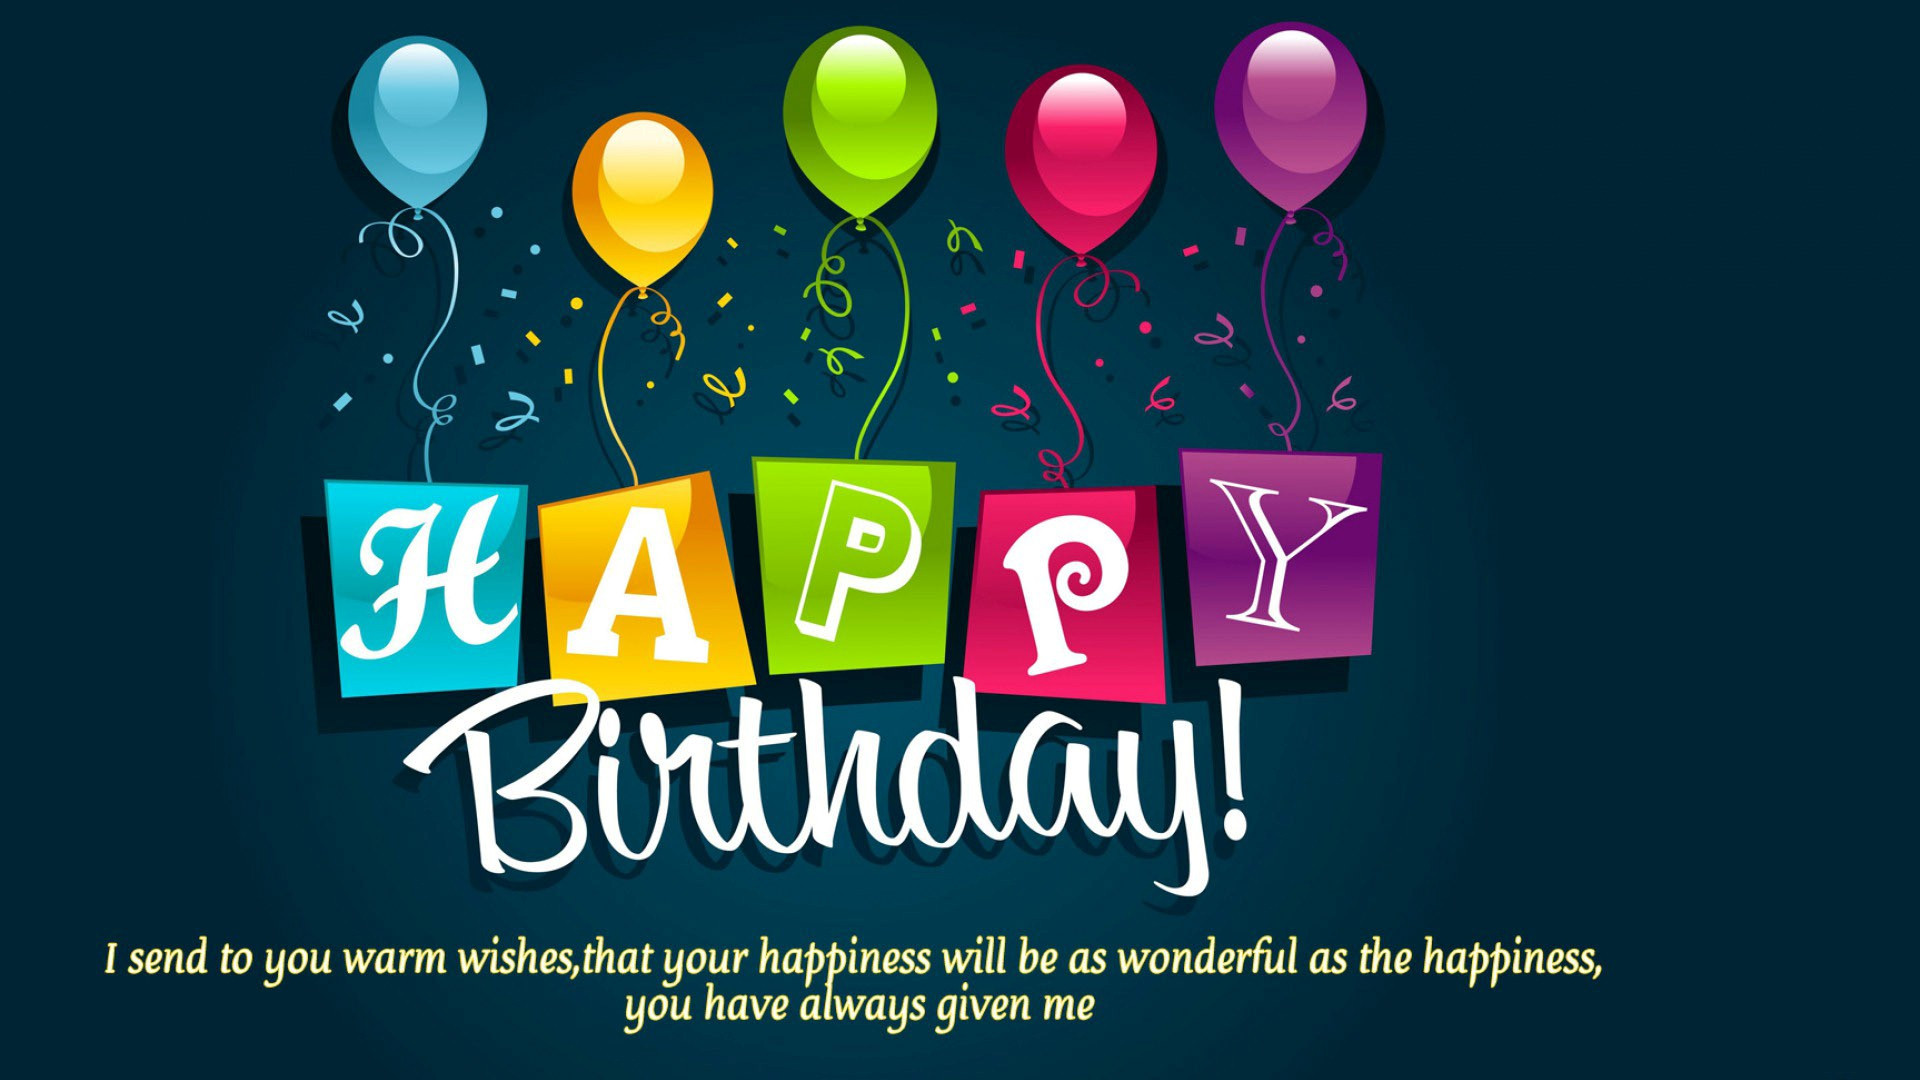 Birthday Images With Quotes
 Wish You Happy Birthday